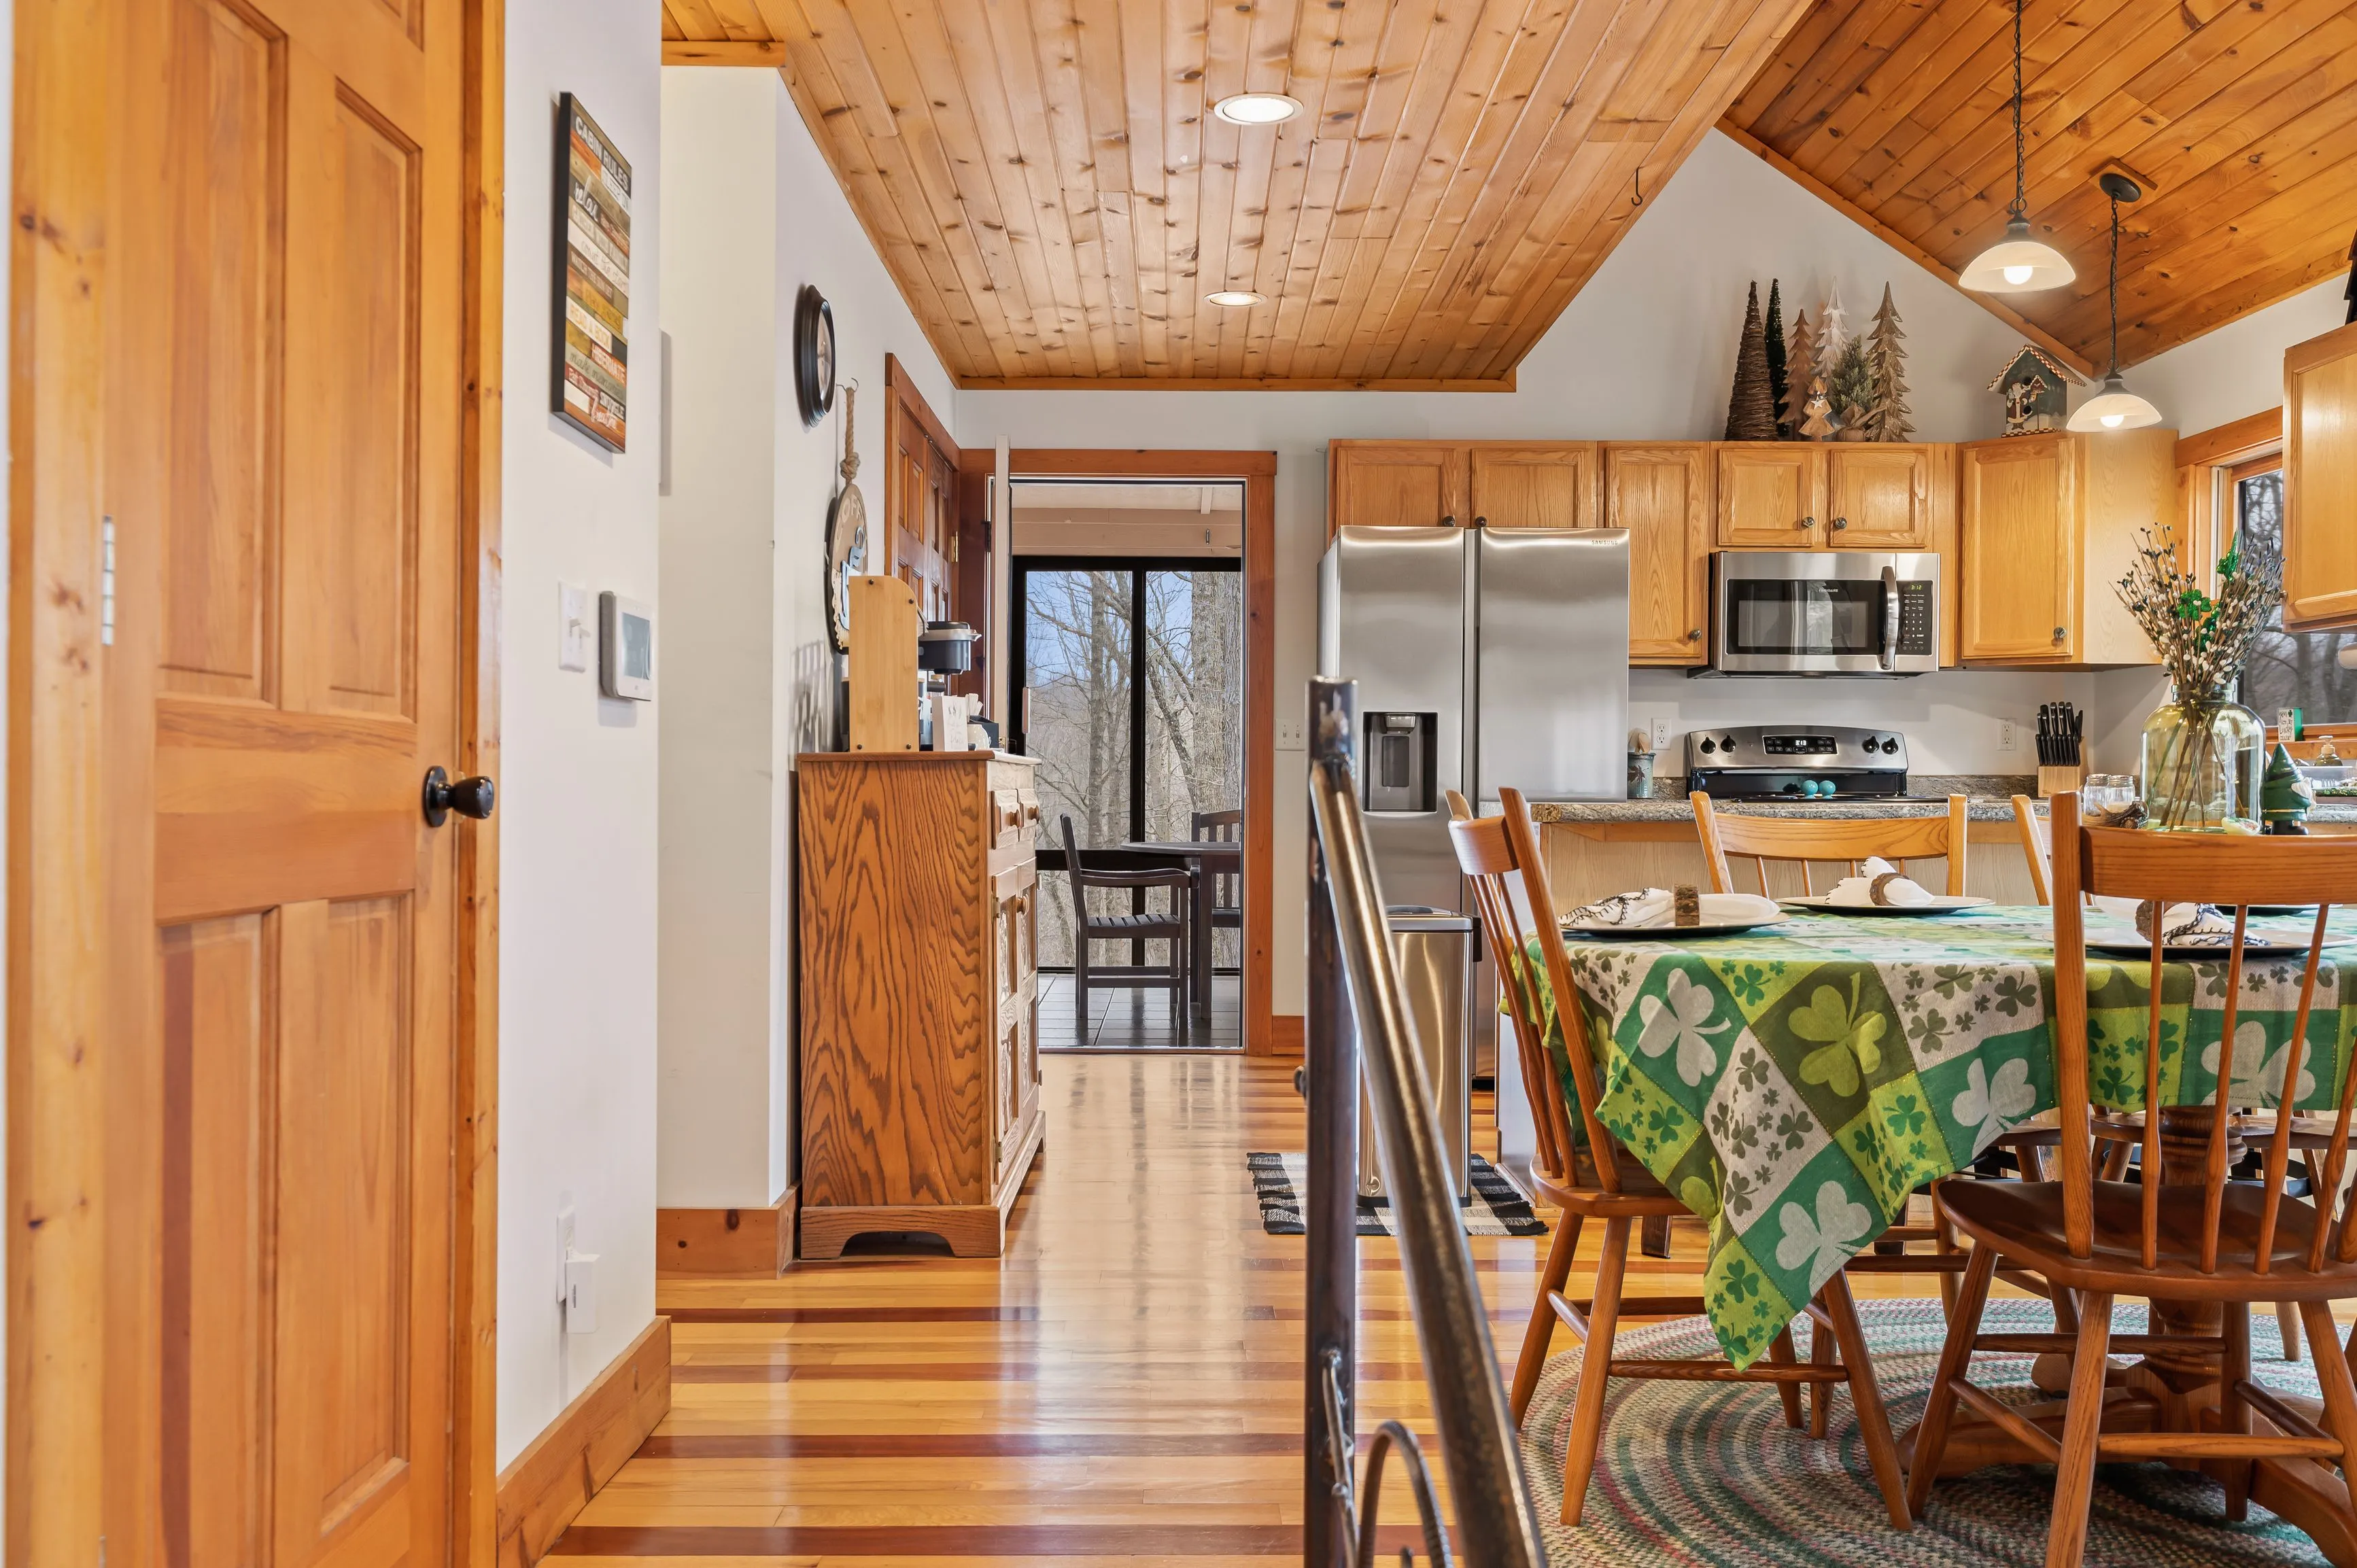 Cozy wooden cabin interior with open concept kitchen and dining area, featuring stainless steel appliances, a wooden dining table with a clover-patterned tablecloth, and view to a deck area through sliding doors.